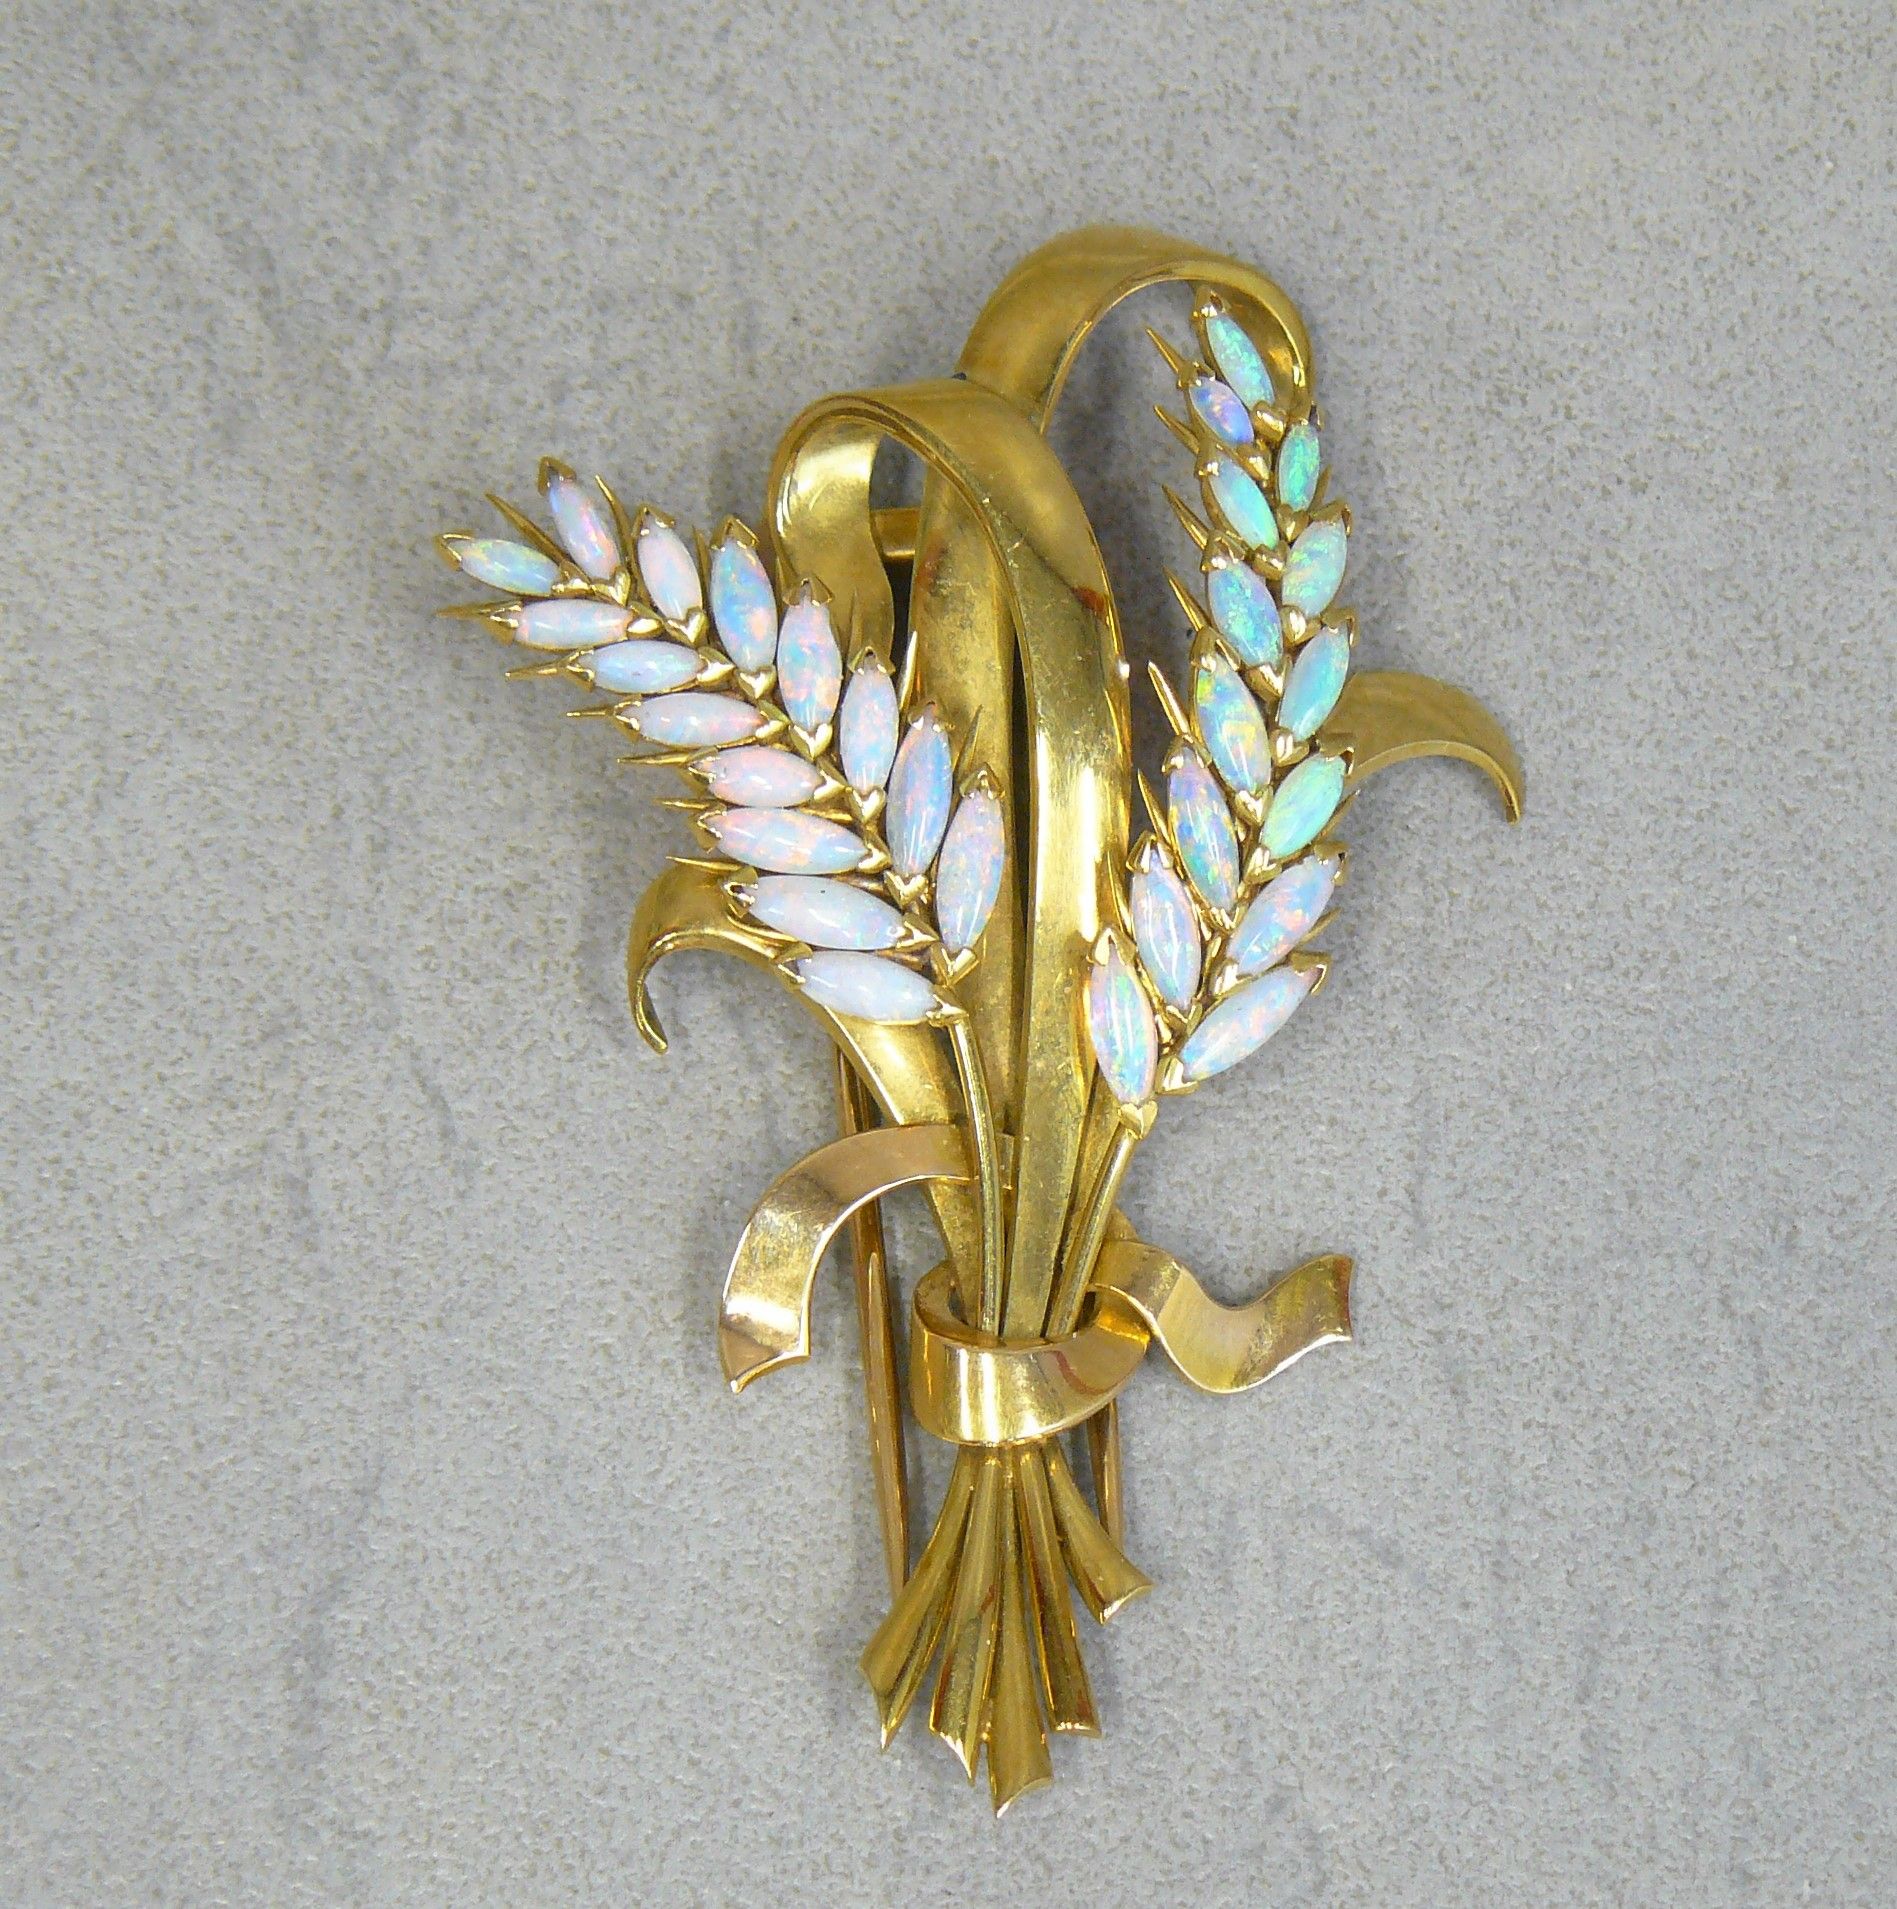 Null Gold wheat sheaf brooch (eagle) set with 30 oval opals - gross weight 19.10&hellip;